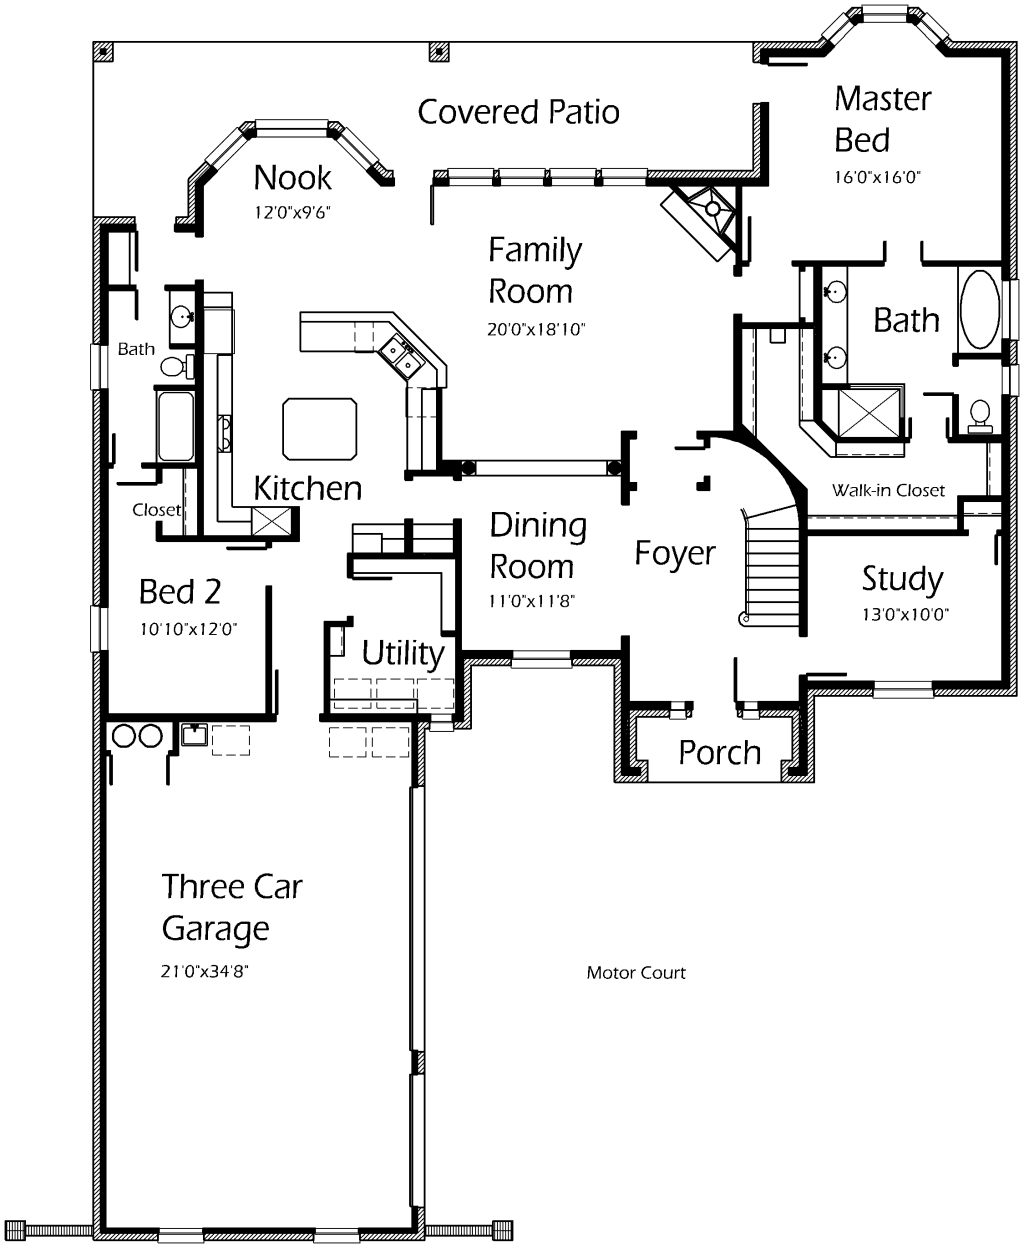 U3540A Texas House Plans Over 700 Proven Home Designs